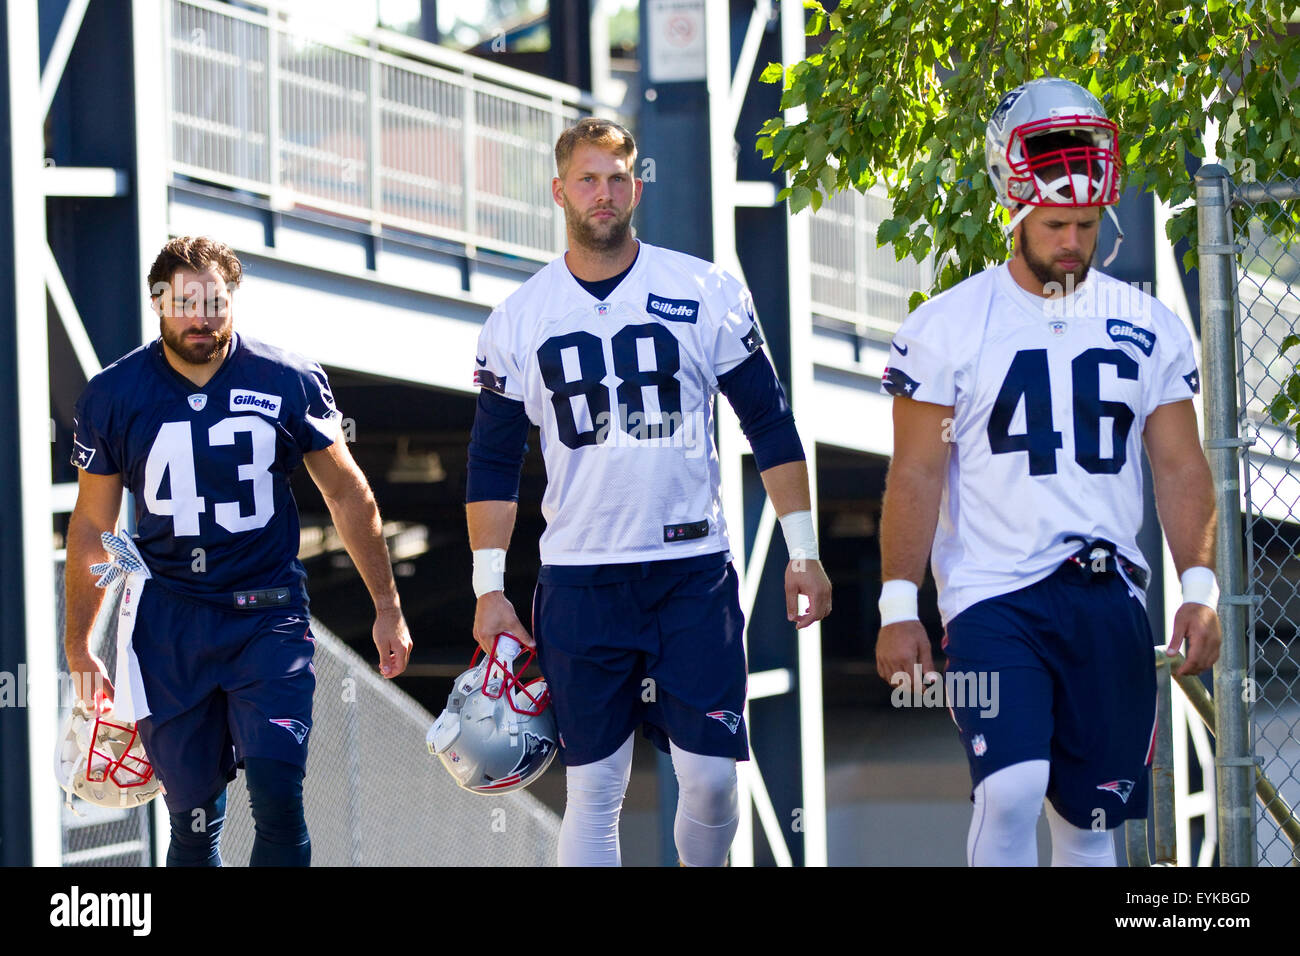 Gillette Stadium. 31st July, 2015. New England Patriots defensive back Nate Ebner (43), New England Patriots tight end Scott Chandler (88) and New England Patriots fullback James Devlin (46) take the field during NFL training camp at Gillette Stadium. Credit:  Cal Sport Media/Alamy Live News Stock Photo